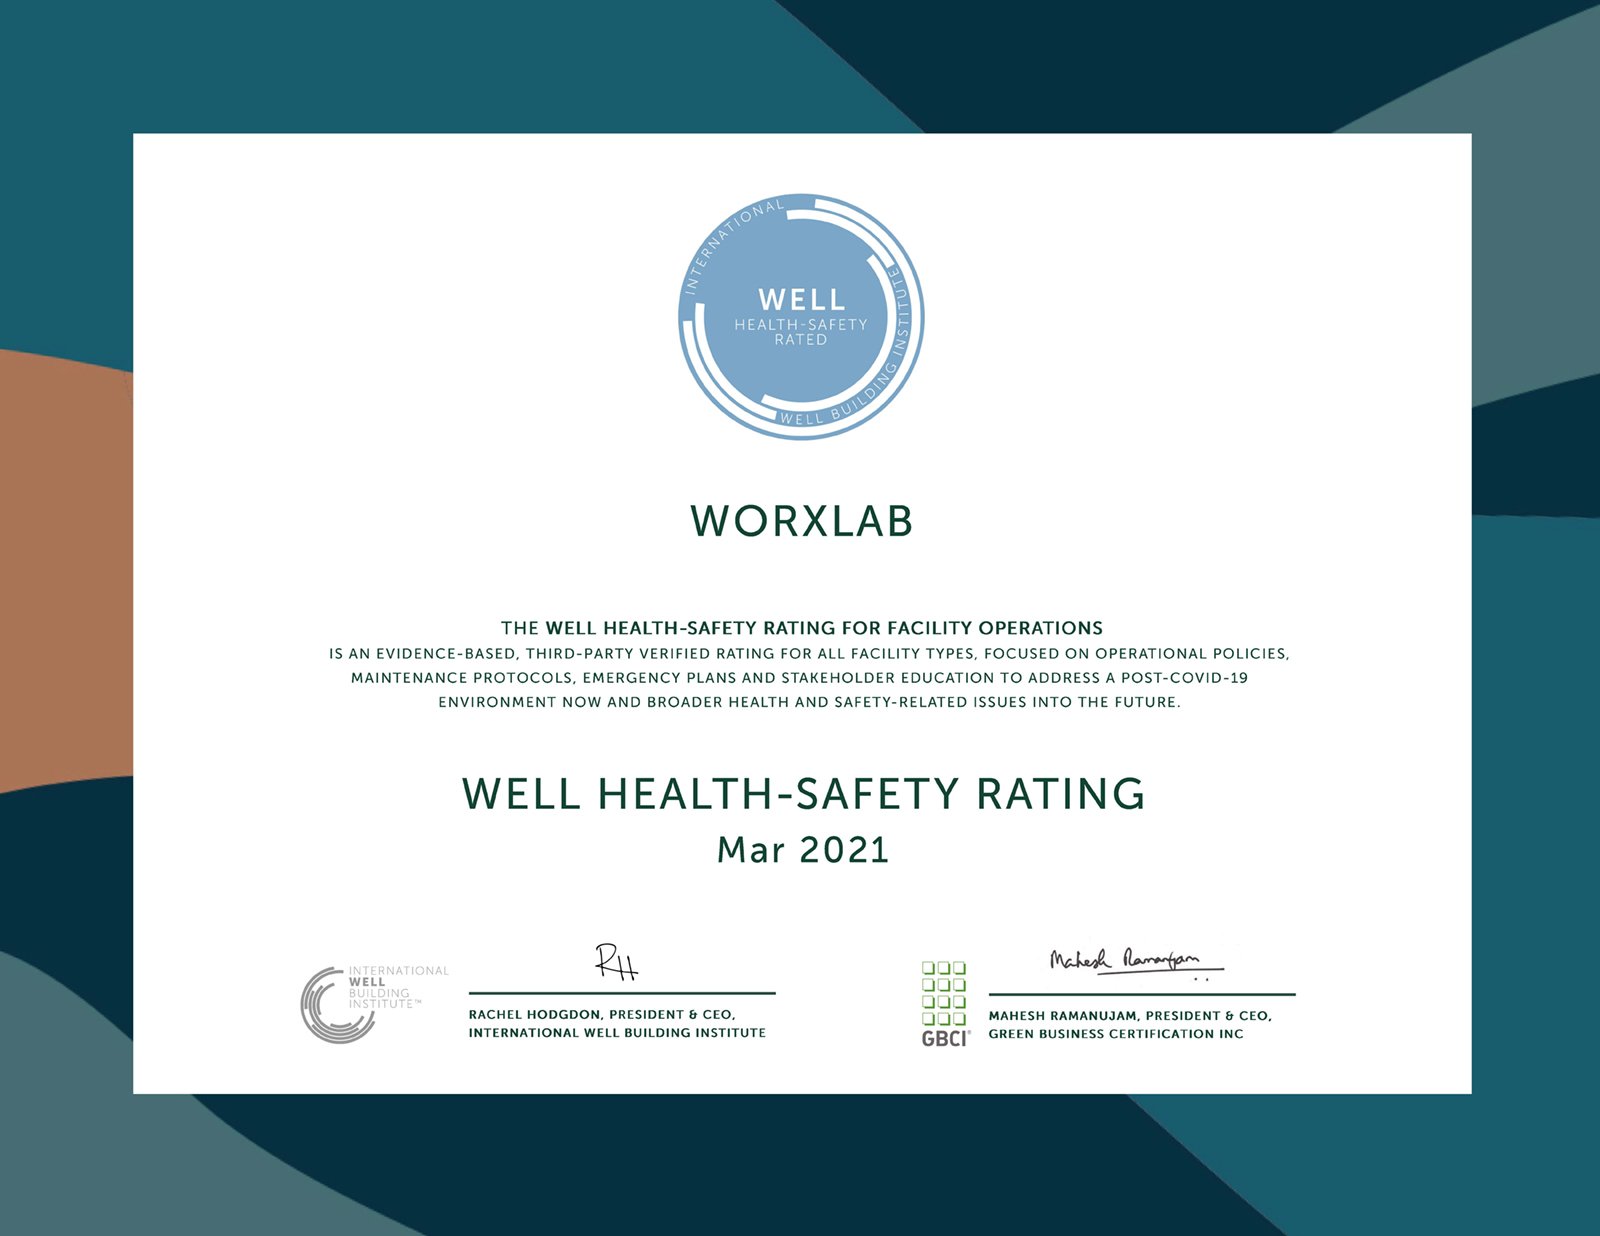 WELL Health-Safety Rating 認証書